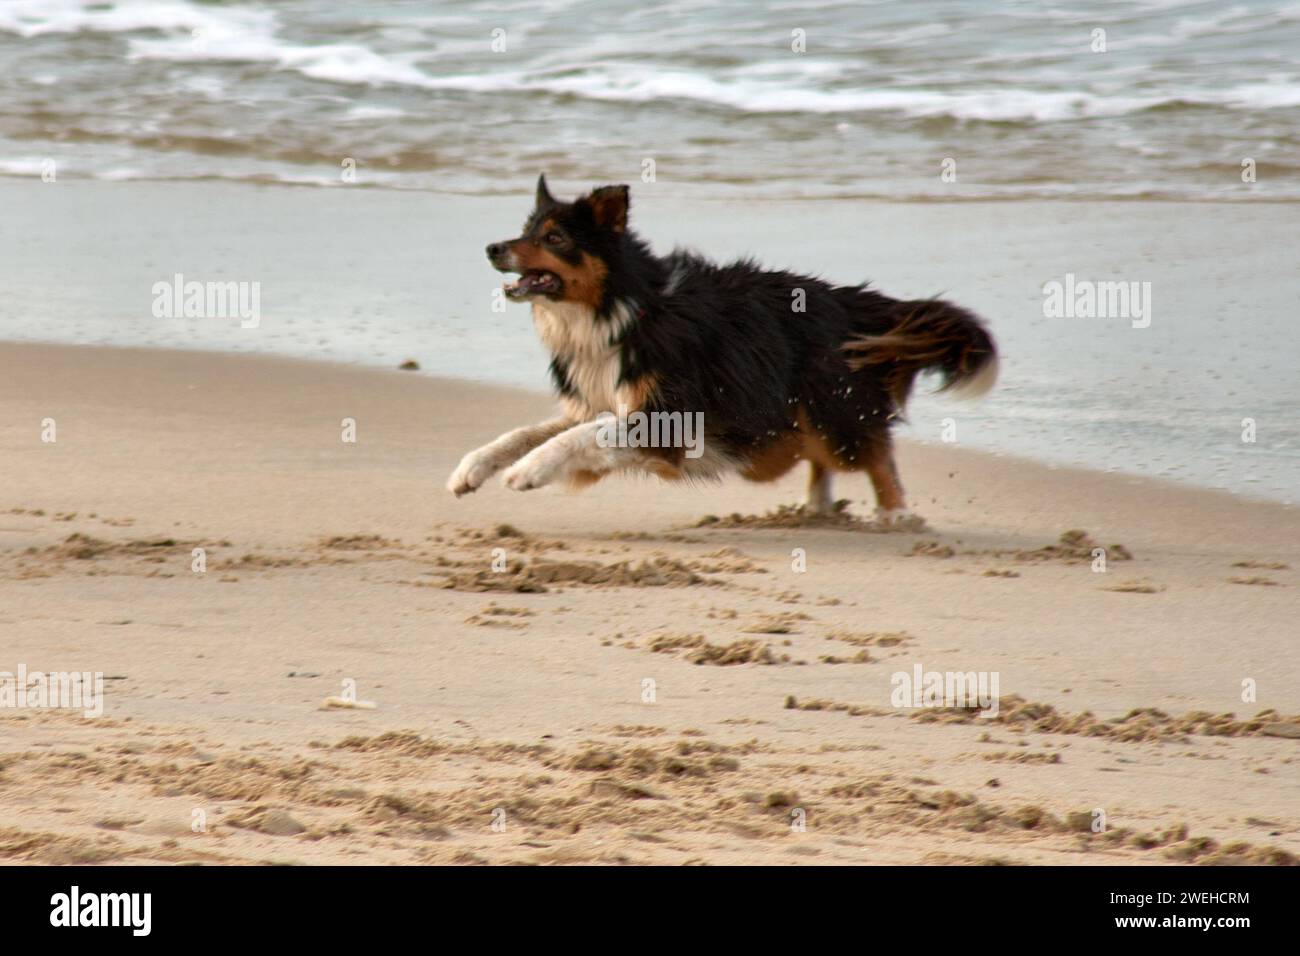 Black, white and brown long haired dog running on the beach during the day Stock Photo